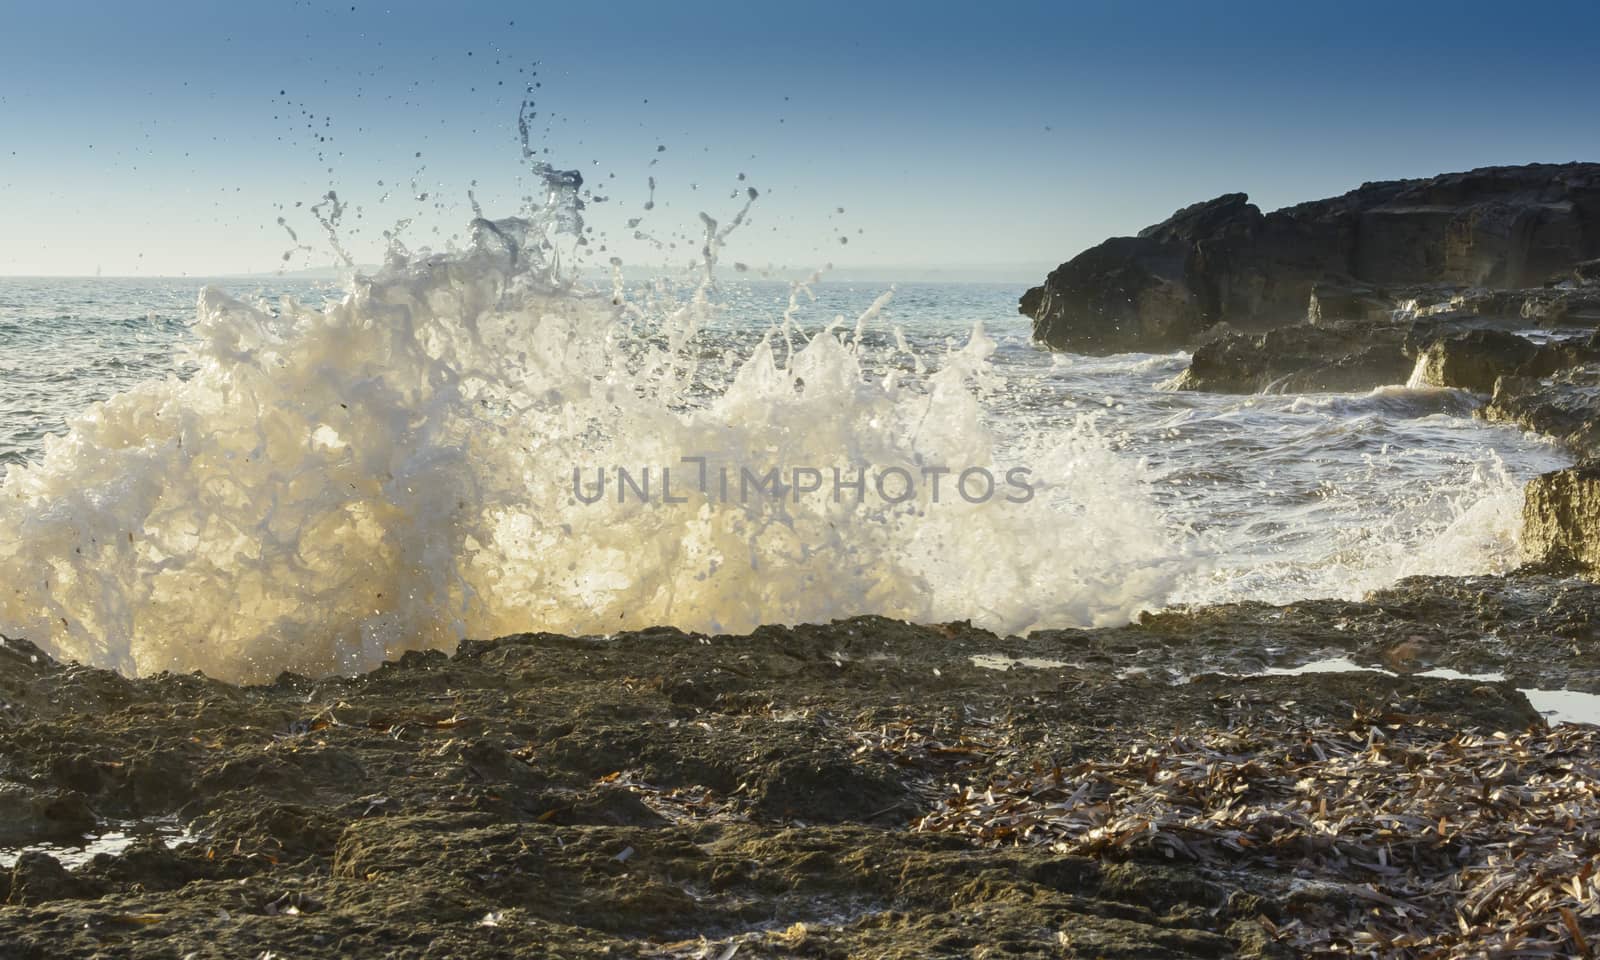 Breaking wave closeup in Ses Covetes, Mallorca, Balearic islands, Spain in October.